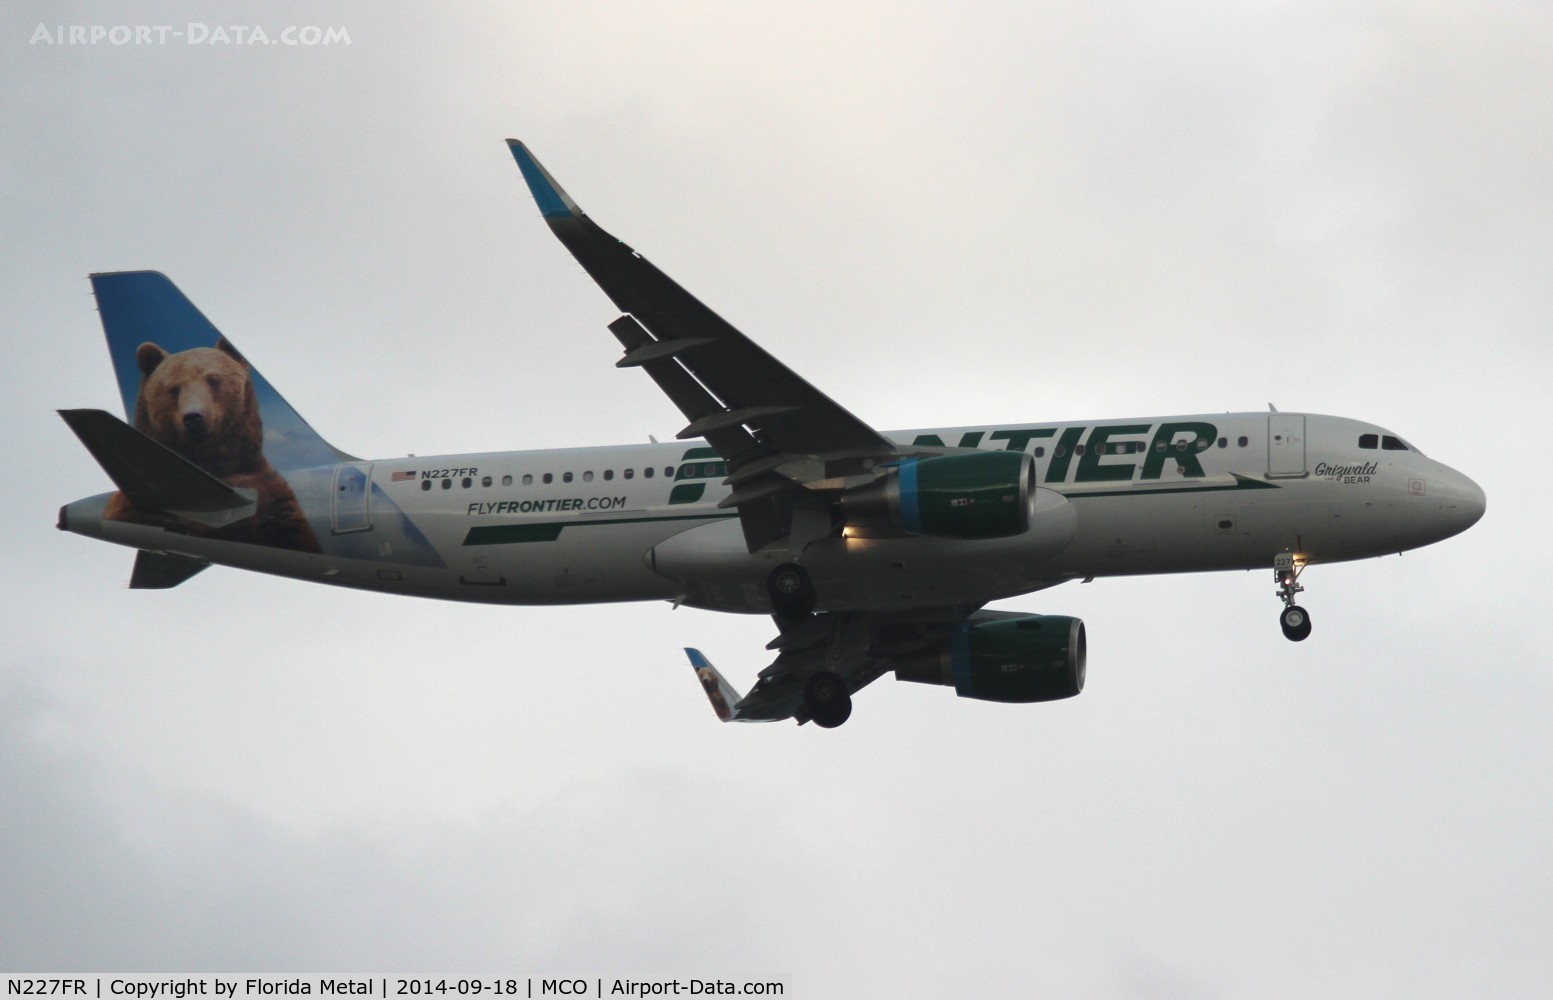 N227FR, 2014 Airbus A320-214 C/N 6184, Frontier A320 Griswald